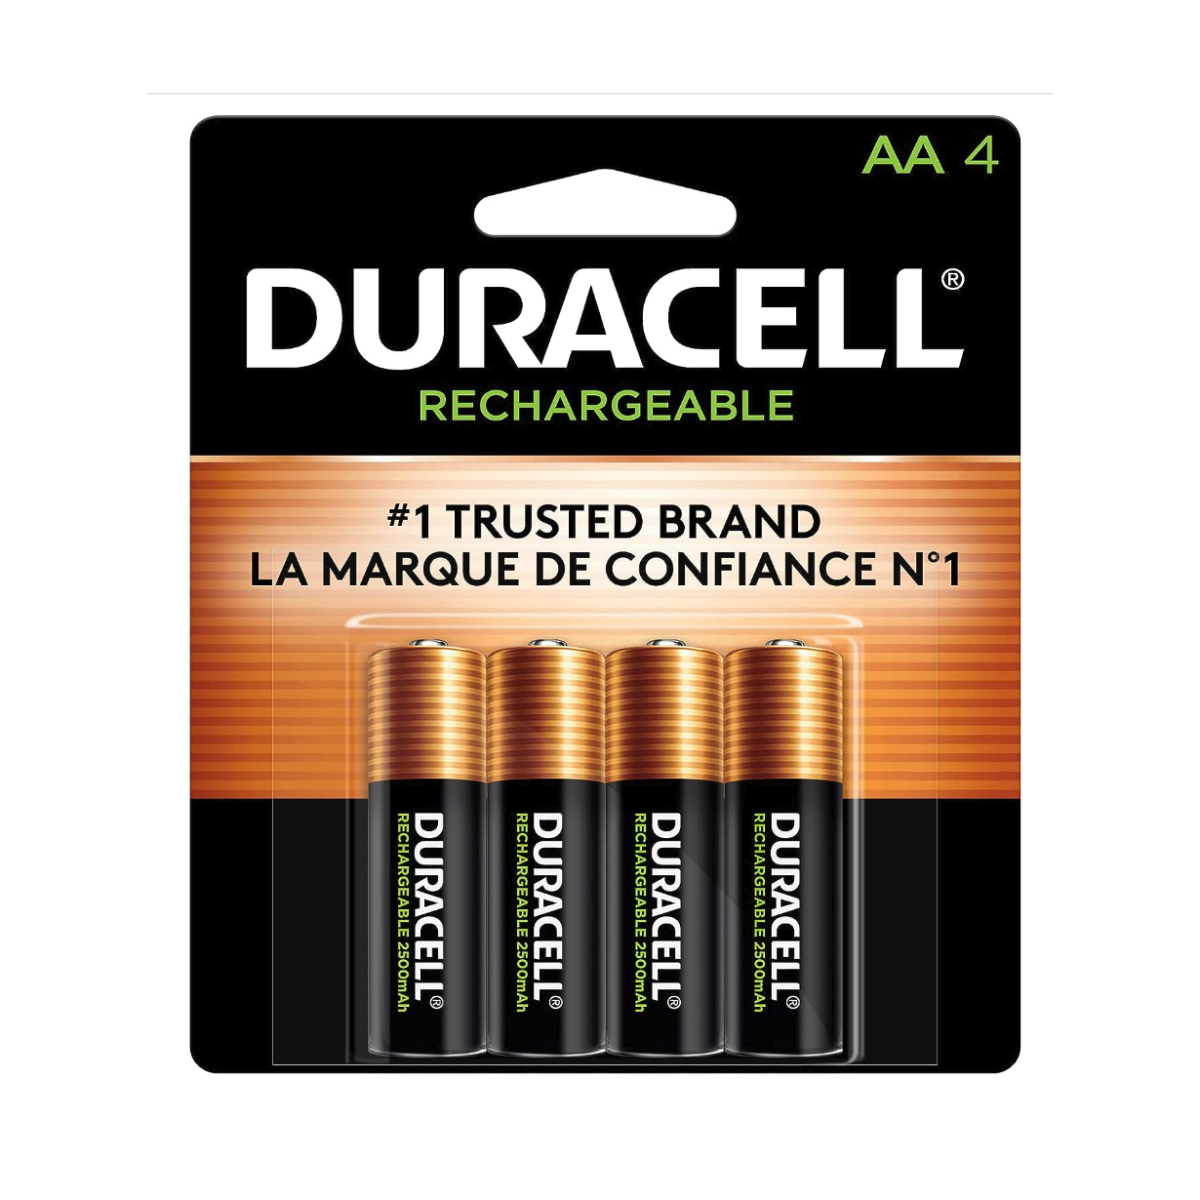 A pack-of-four Duracell Rechargeable AA Batteries